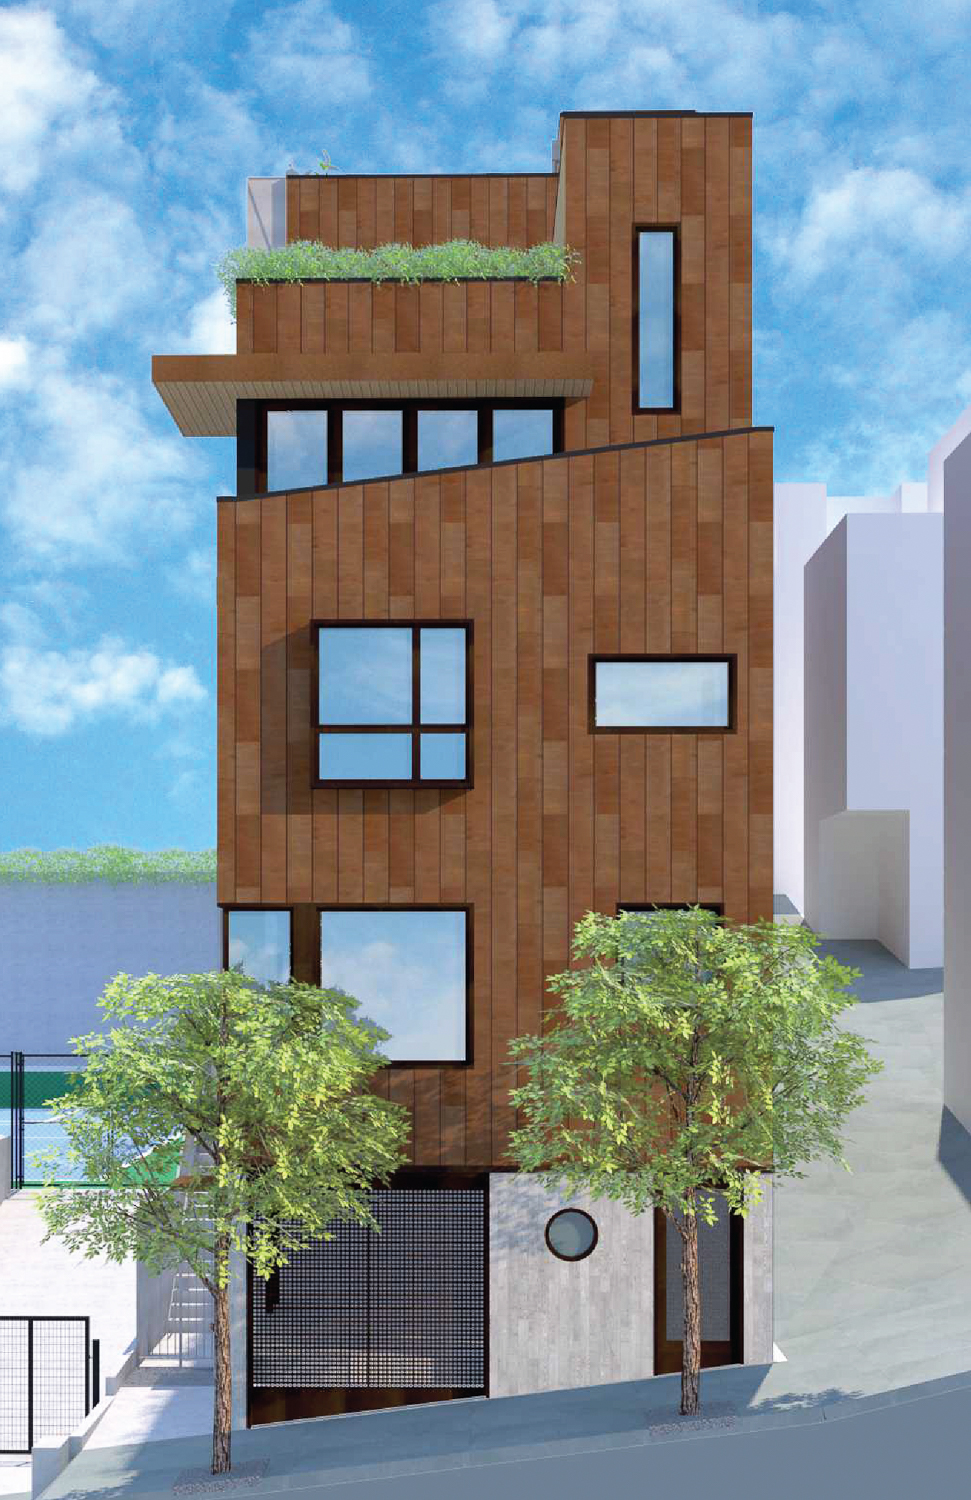 1151 Washington Street facade elevation, rendering by Macy Architecture